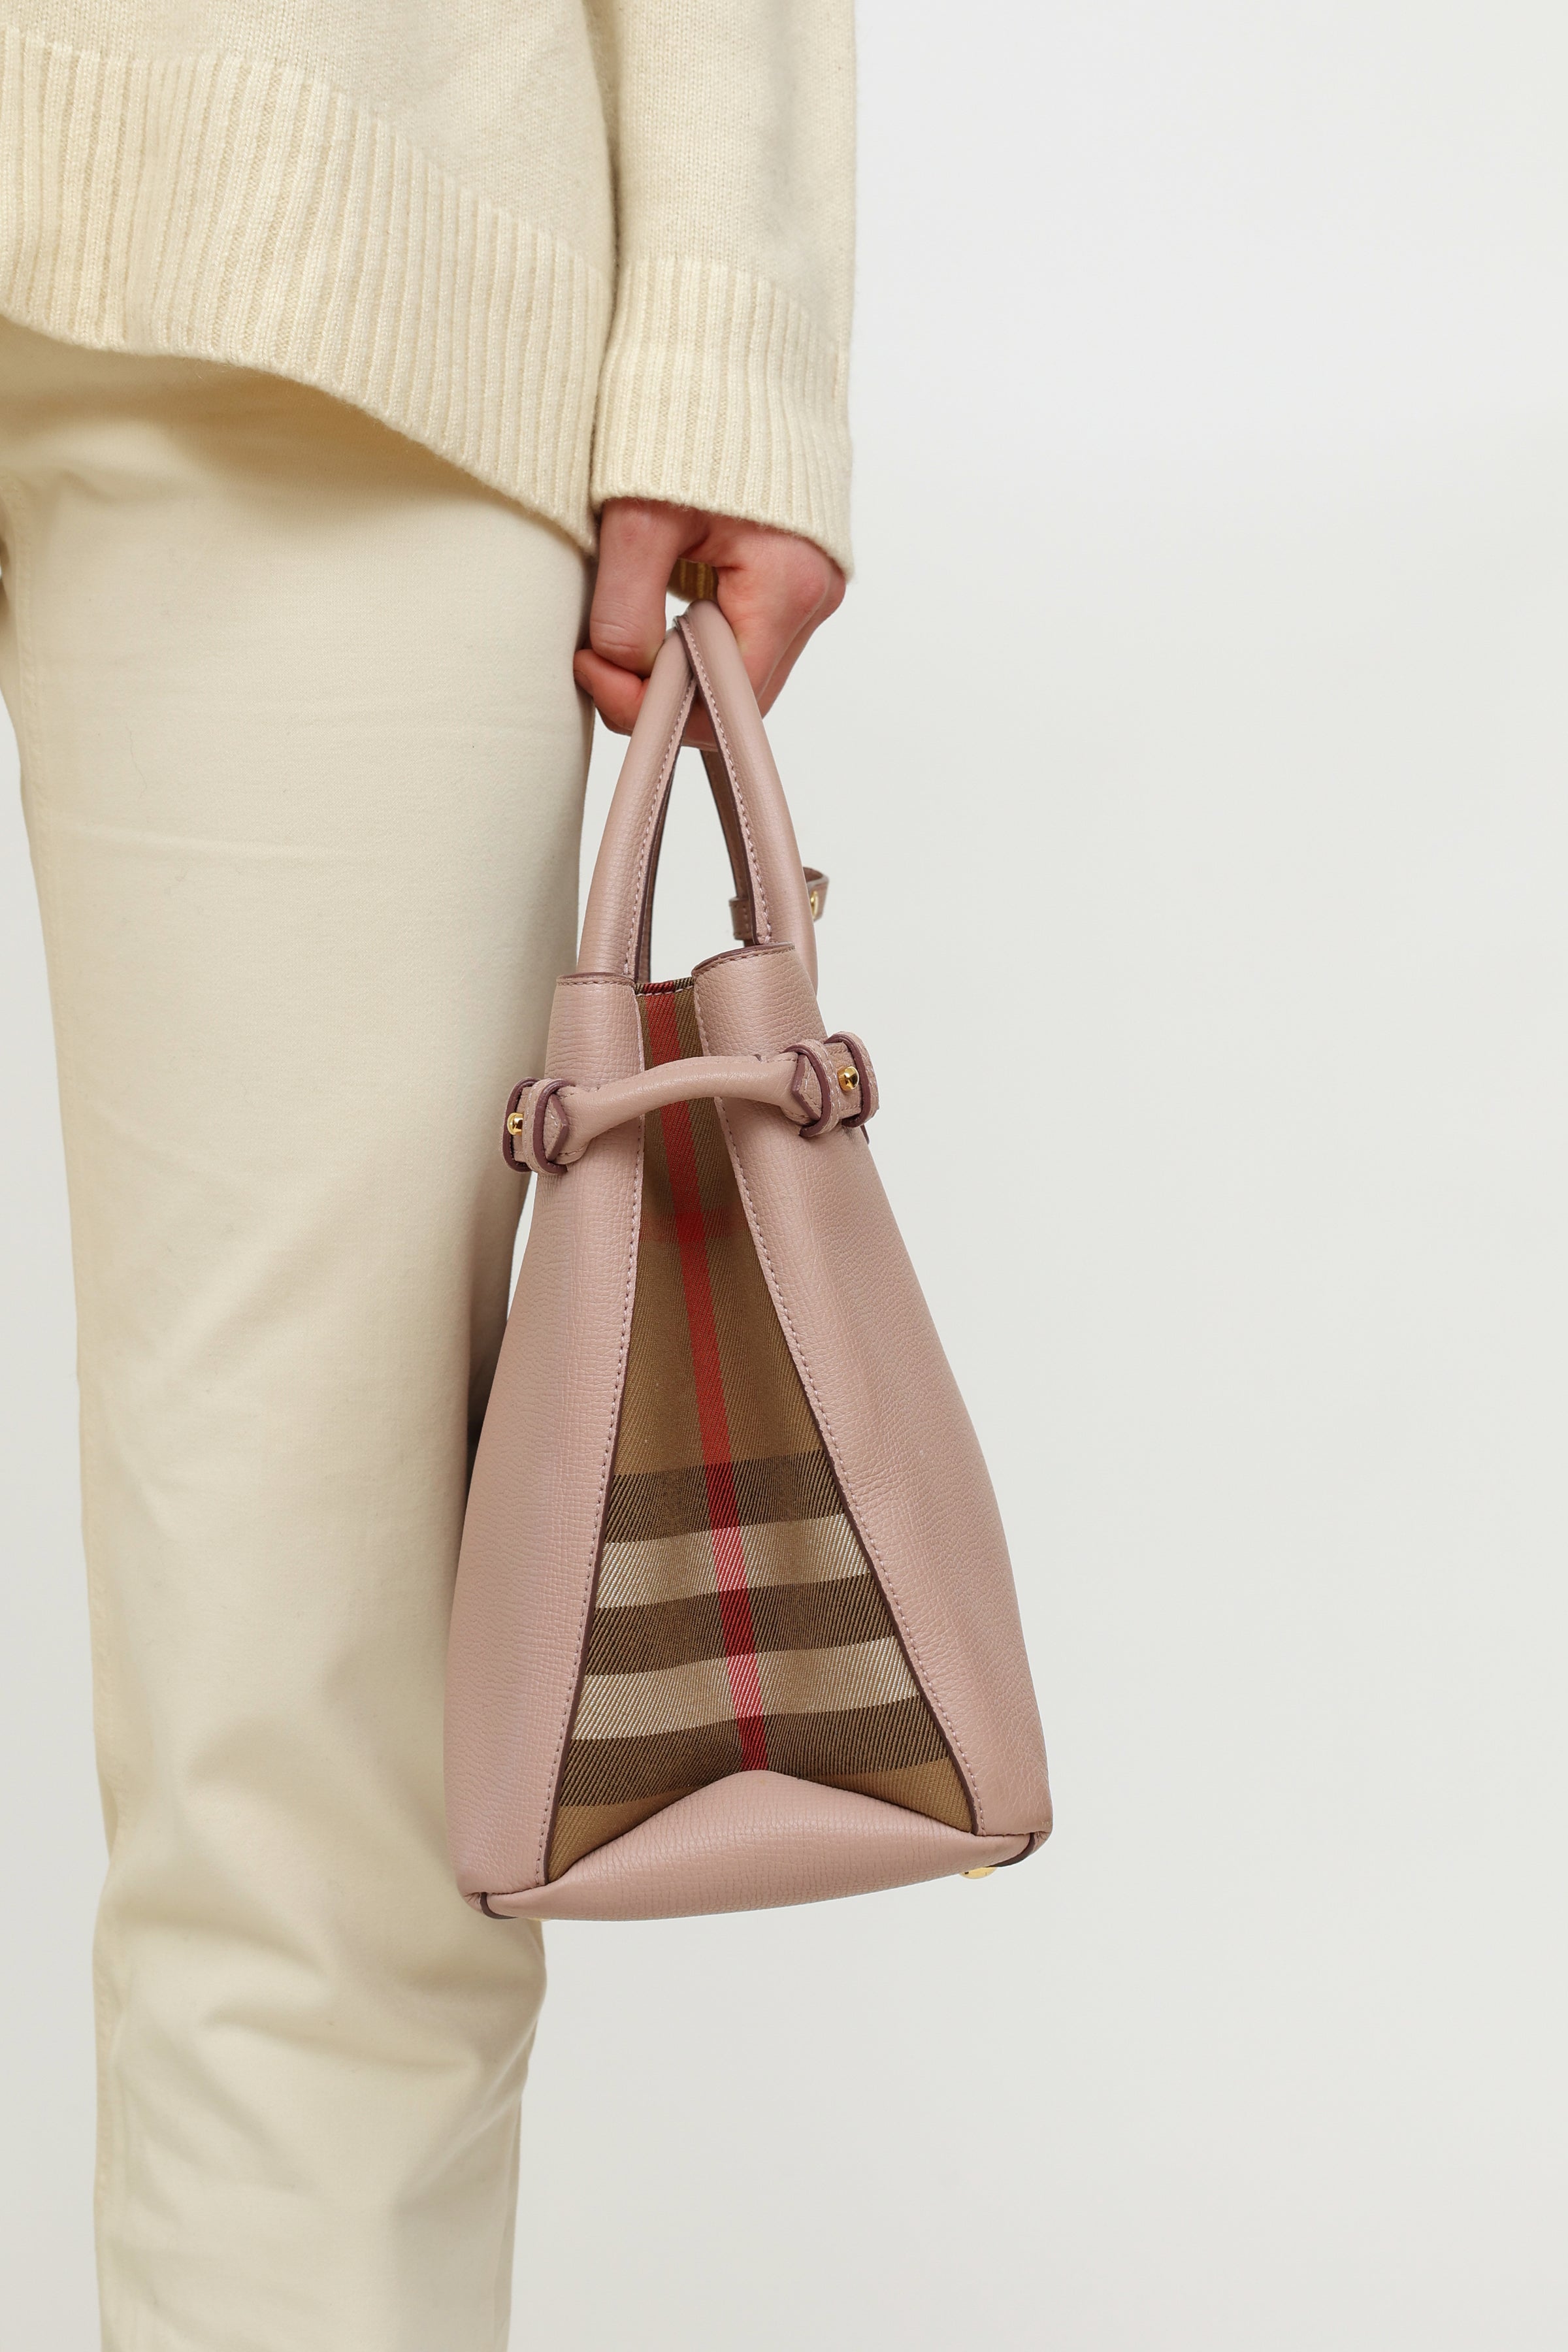 Burberry Banner Large Size